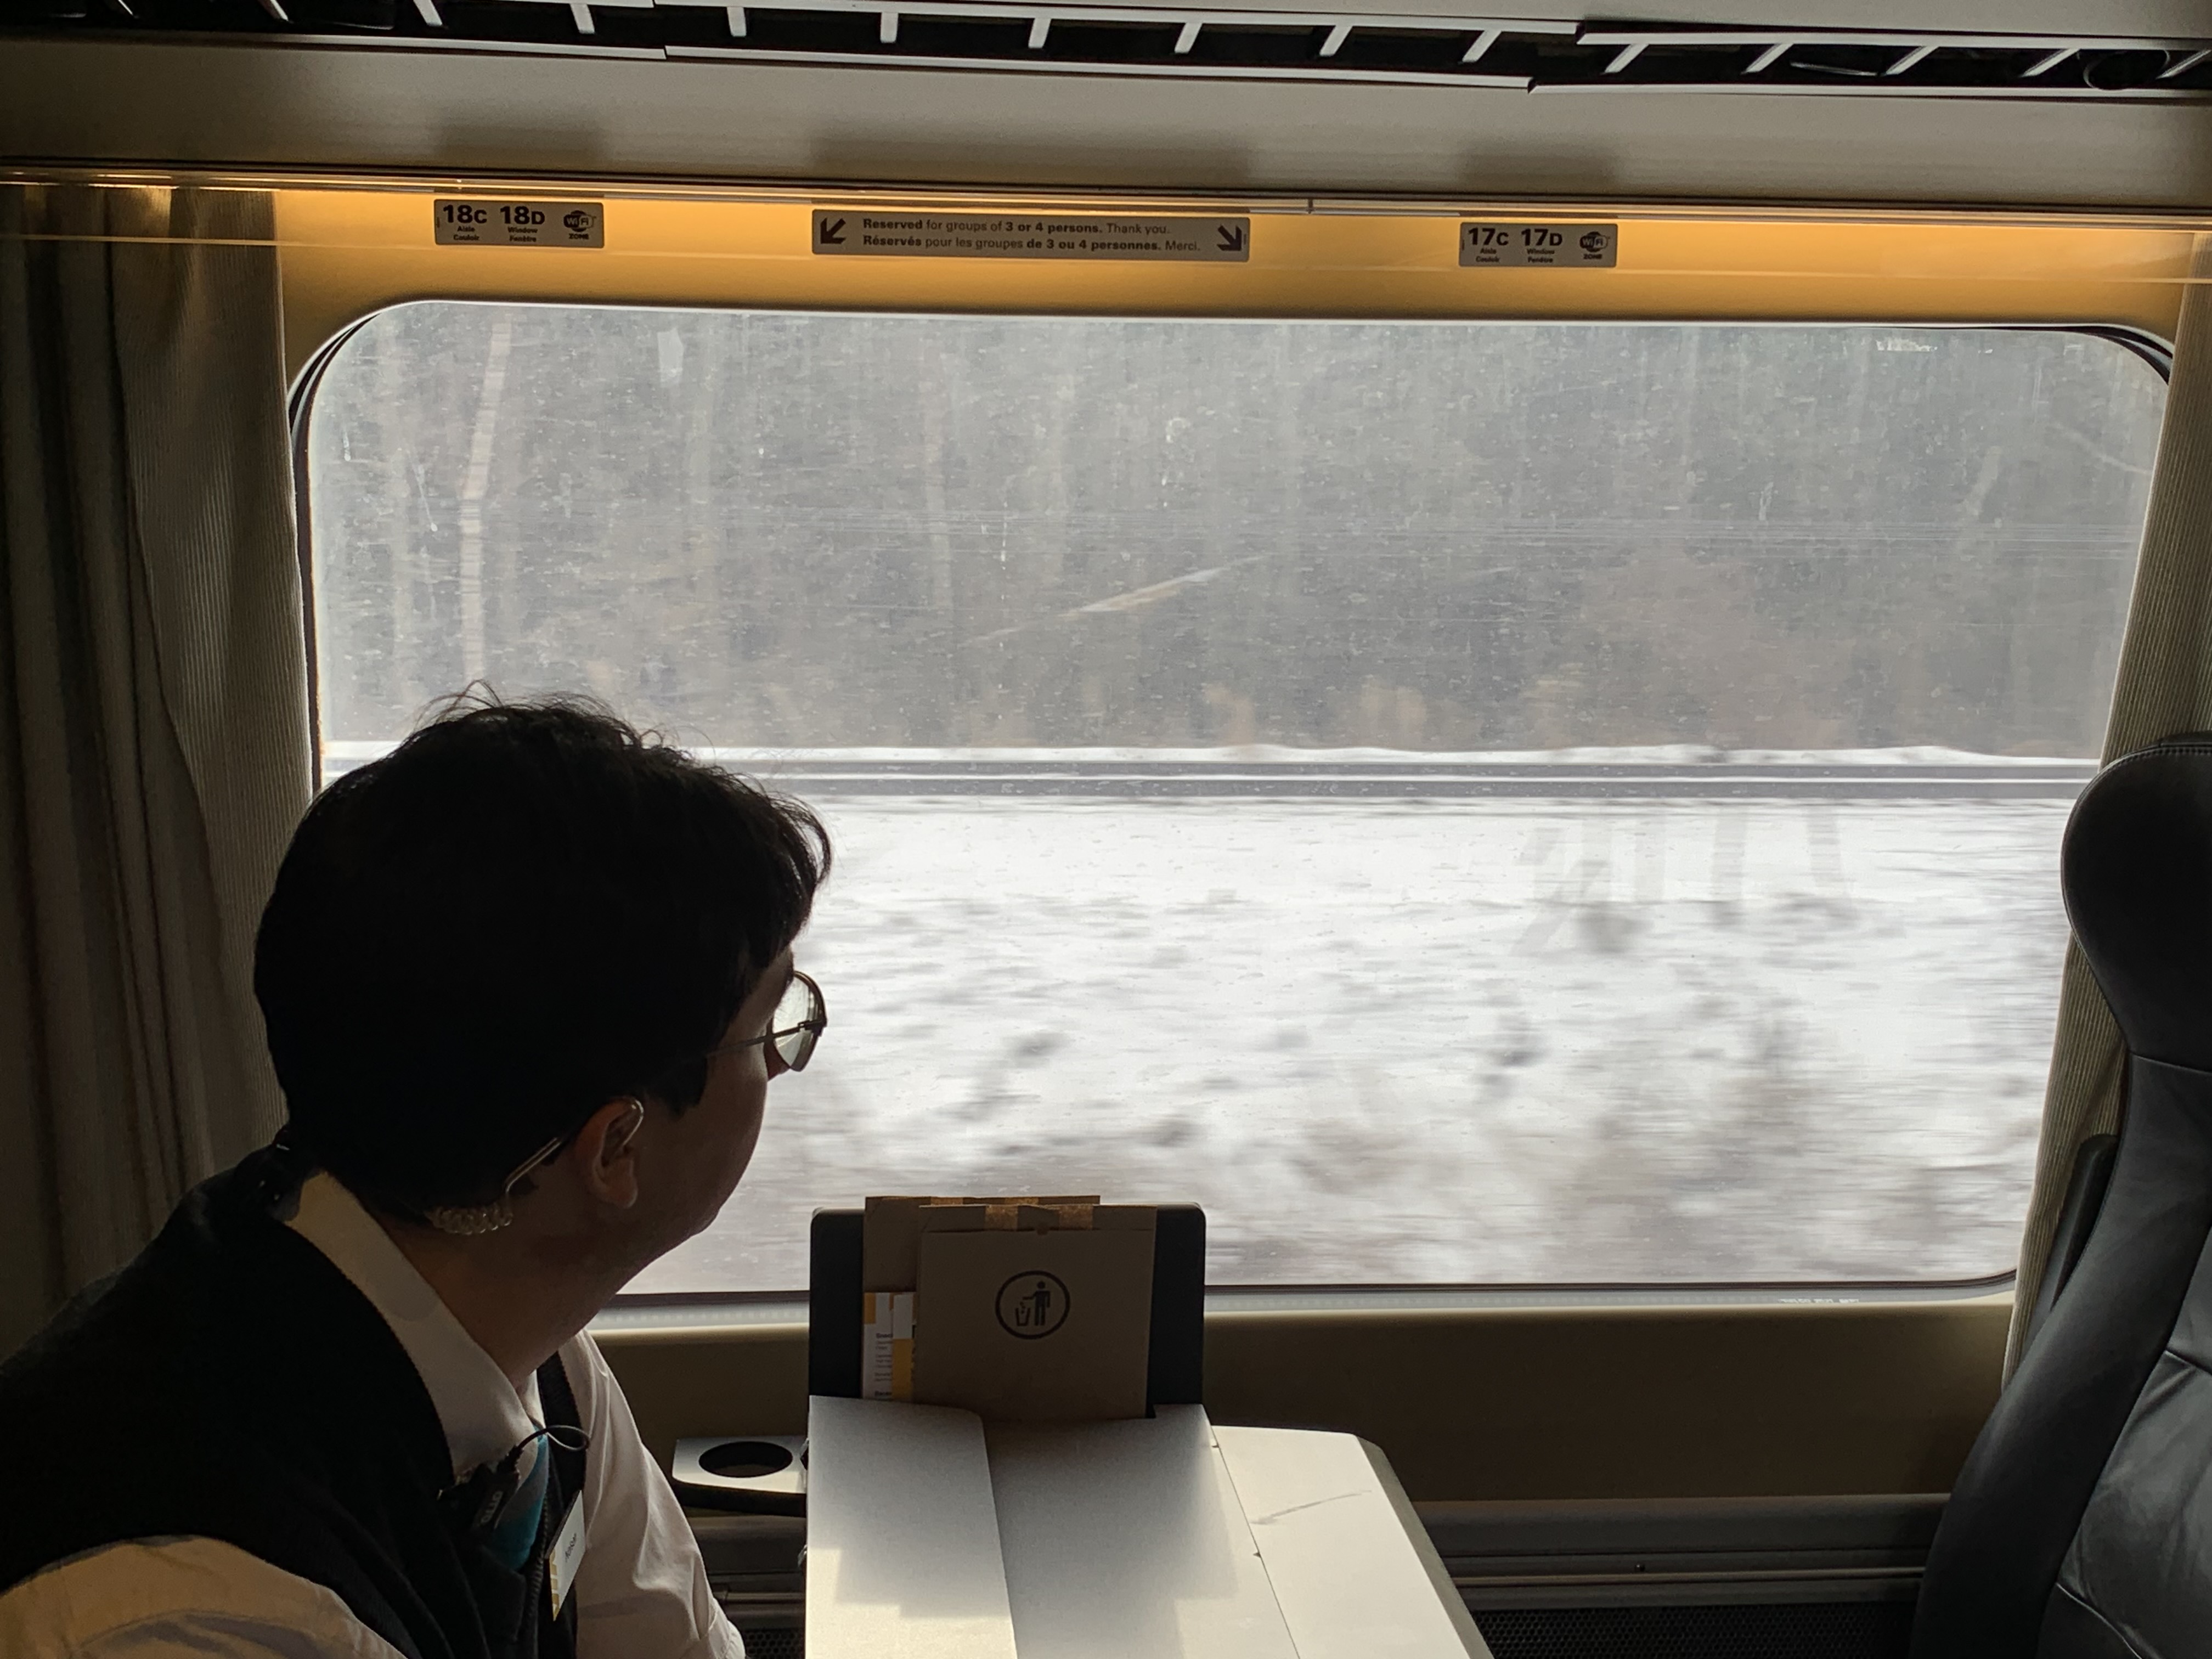 A man looks out the window of a moving train.